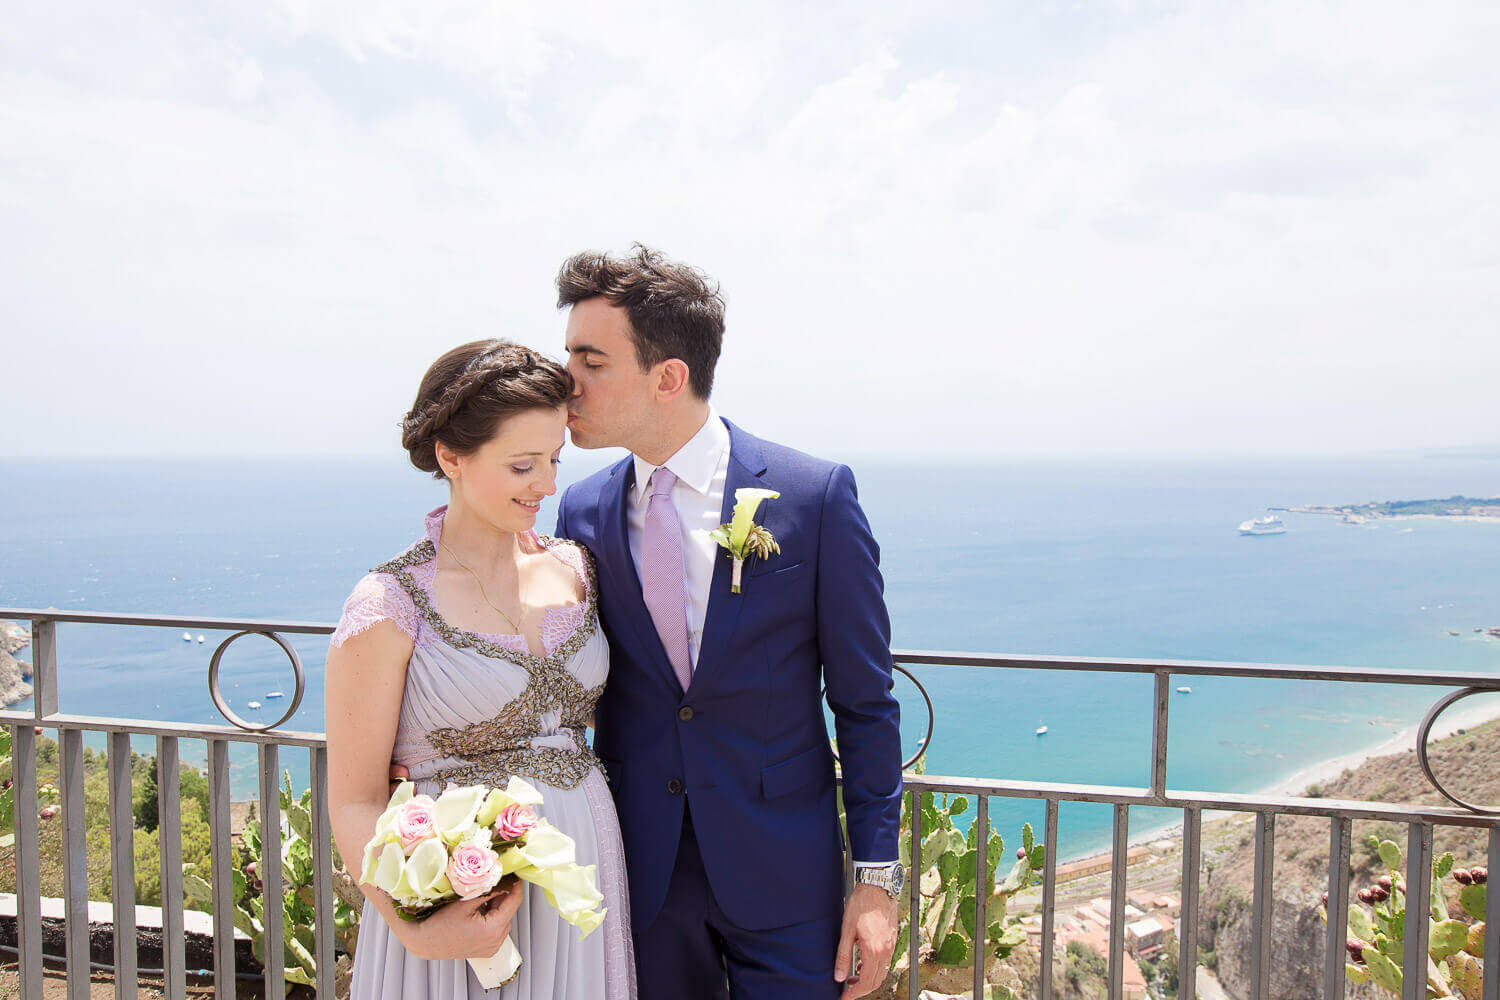 Delightful married couple at the garden of Taormina overlooking the sea, photos by marriage of Nino Lombardo